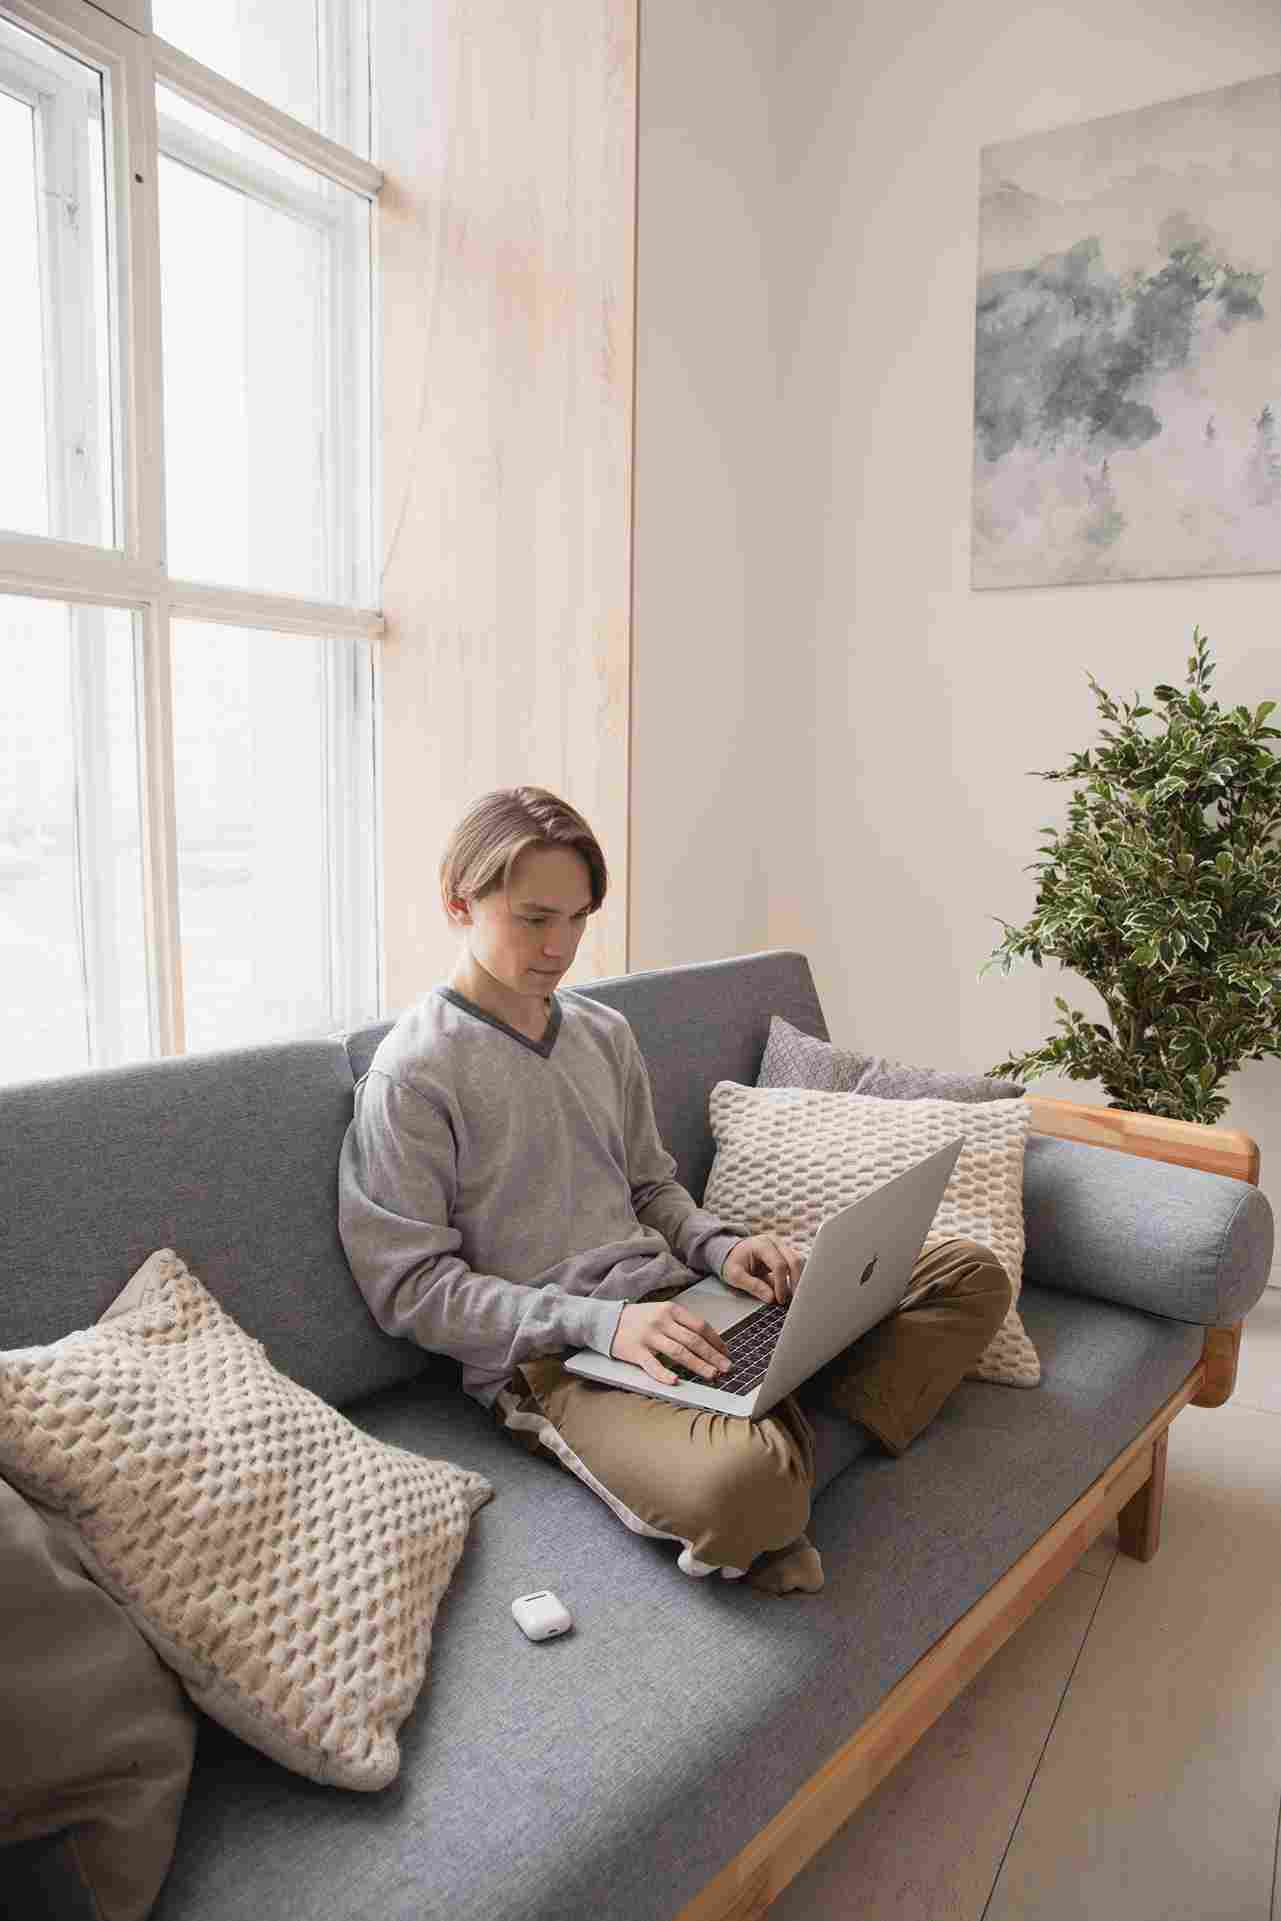 Instead of office chairs and office desks, some remote workers are opting to work from their sofas and sometimes even use a rolled up towel to prop up their laptop.